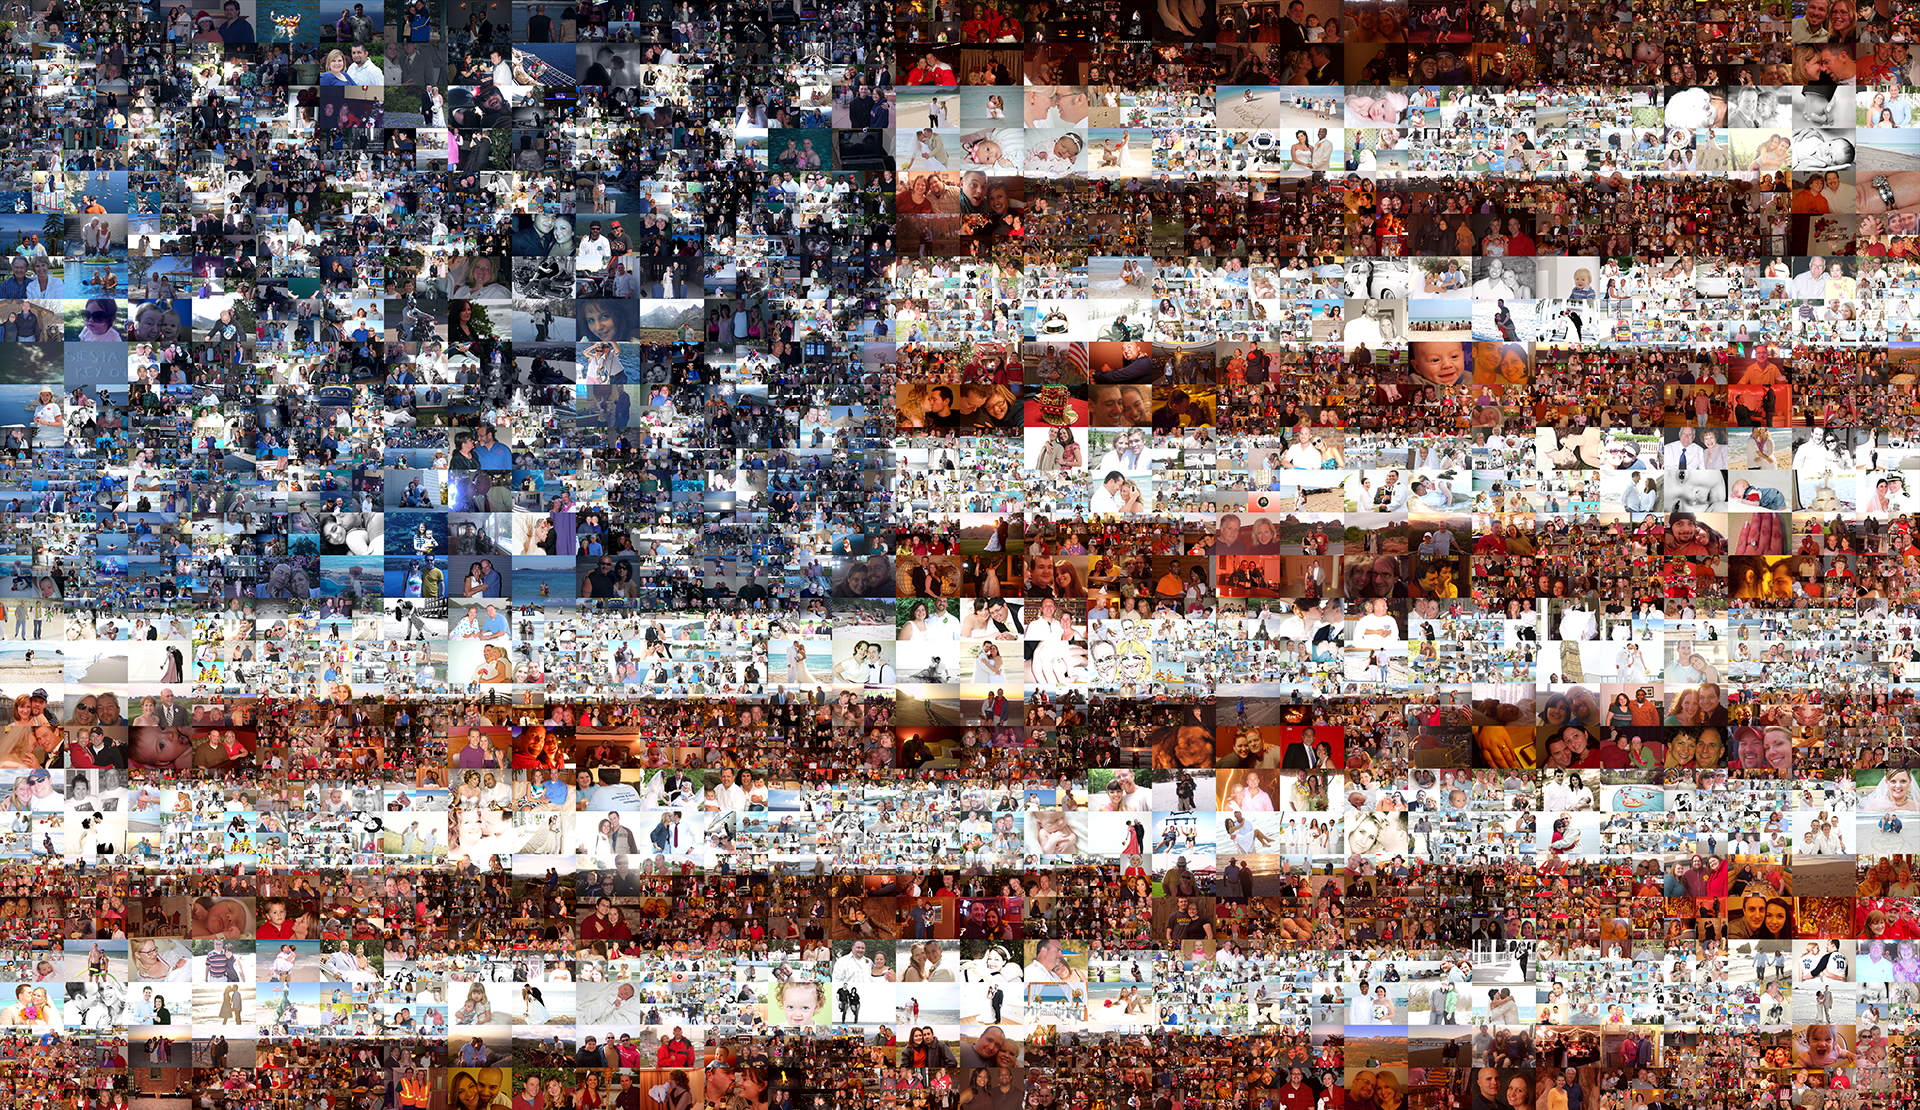 photo mosaic A multi-size cell mosaic mural created using over 10,000 select photos